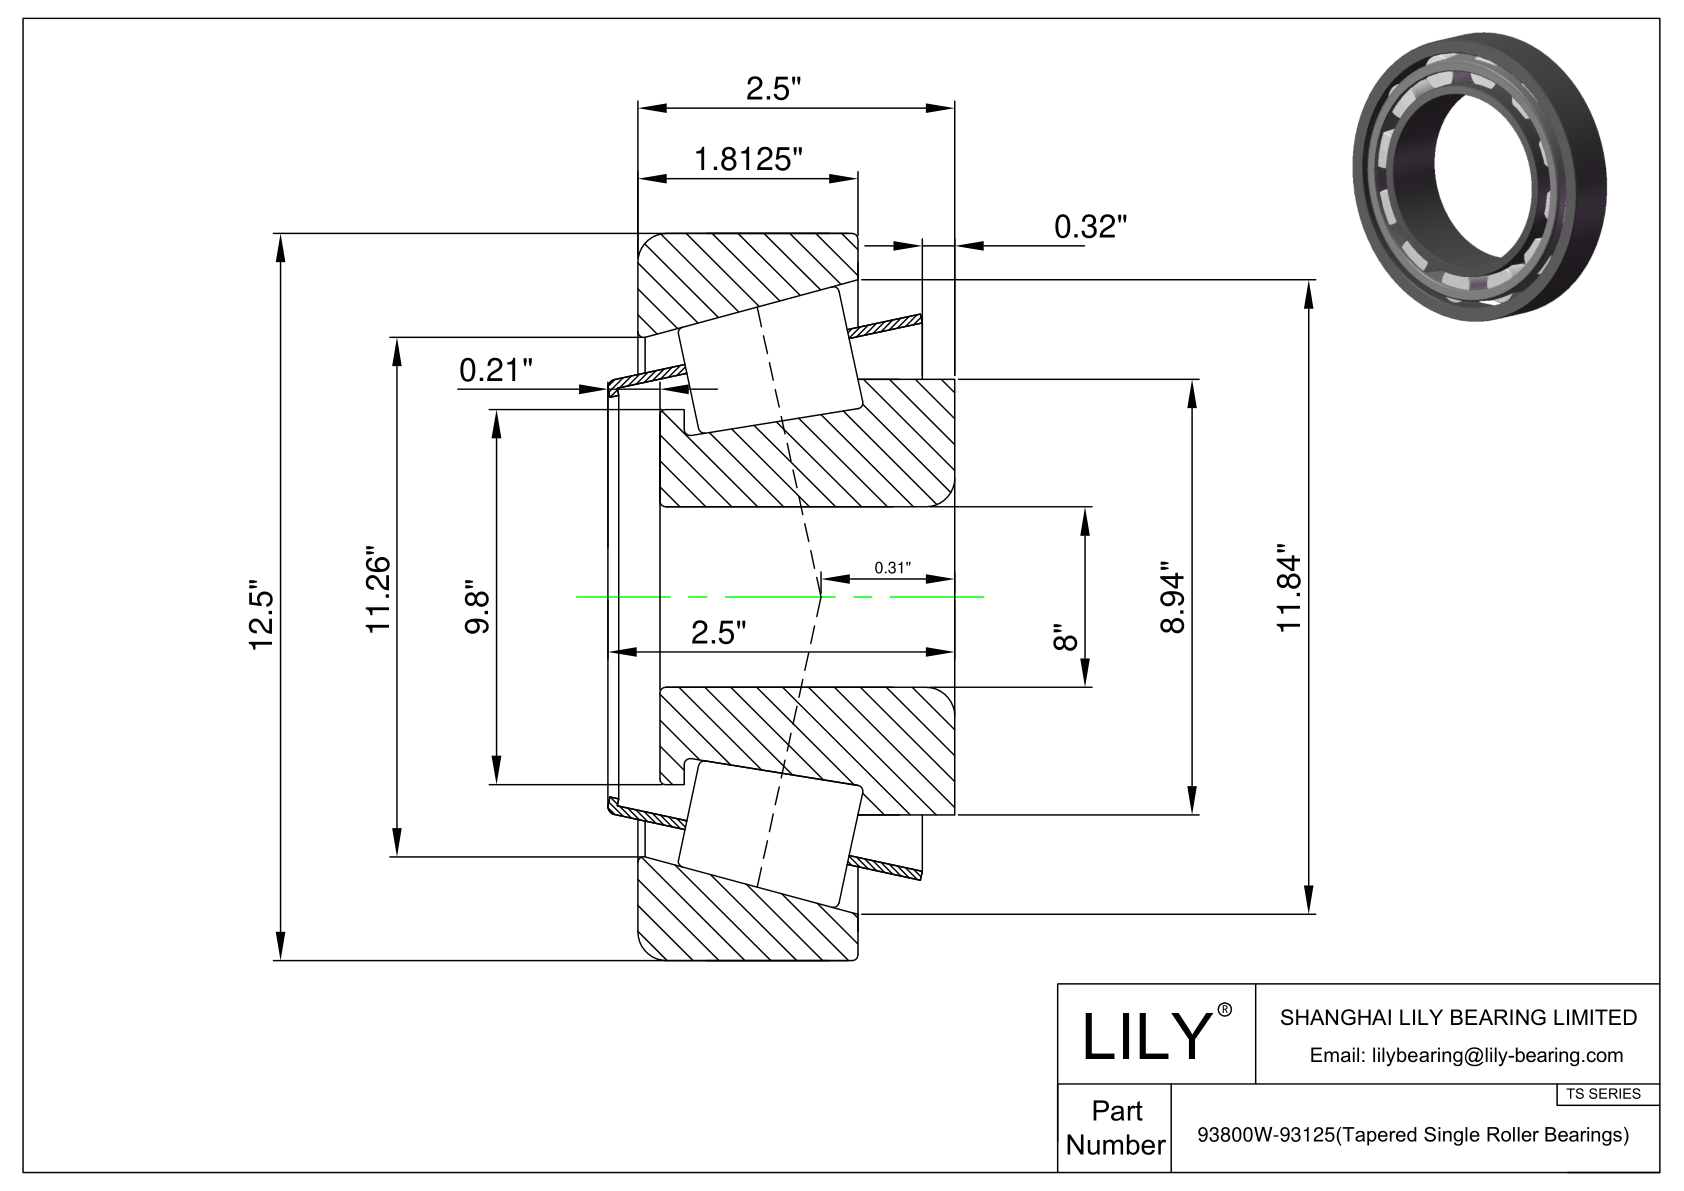 93800W-93125 TS (Tapered Single Roller Bearings) (Imperial) cad drawing